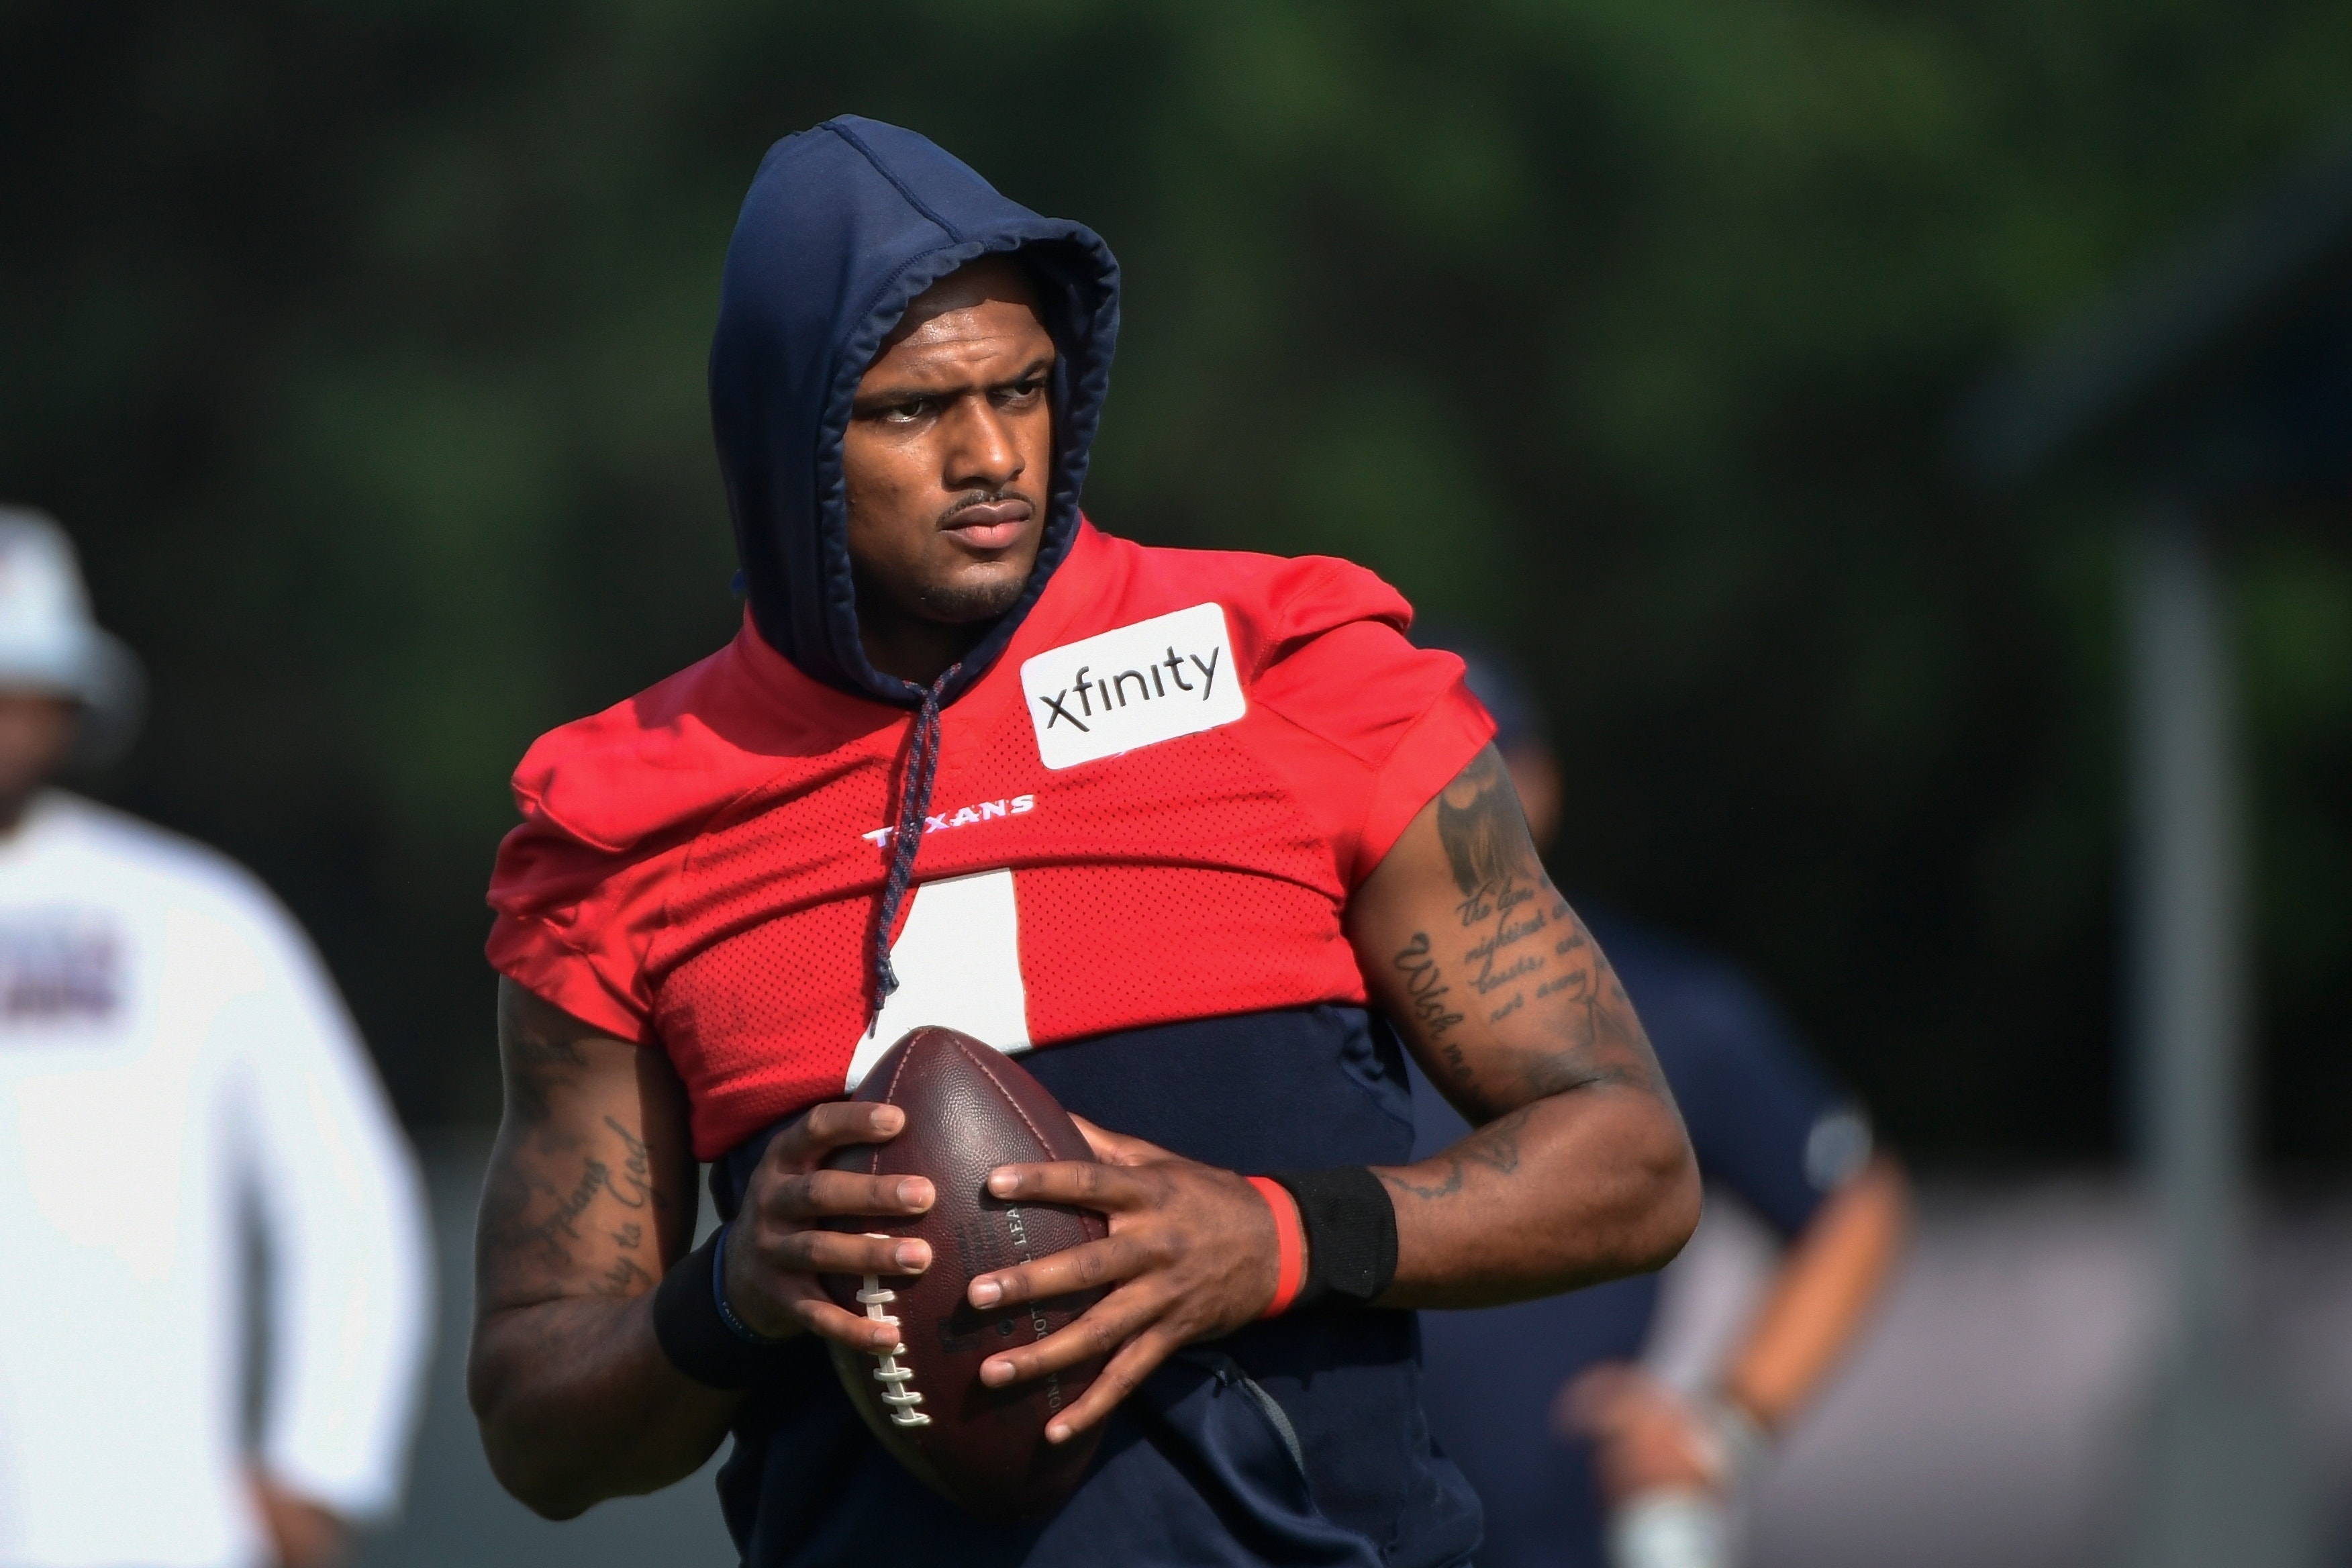 No indictment for Texans QB Watson over sex assault claims